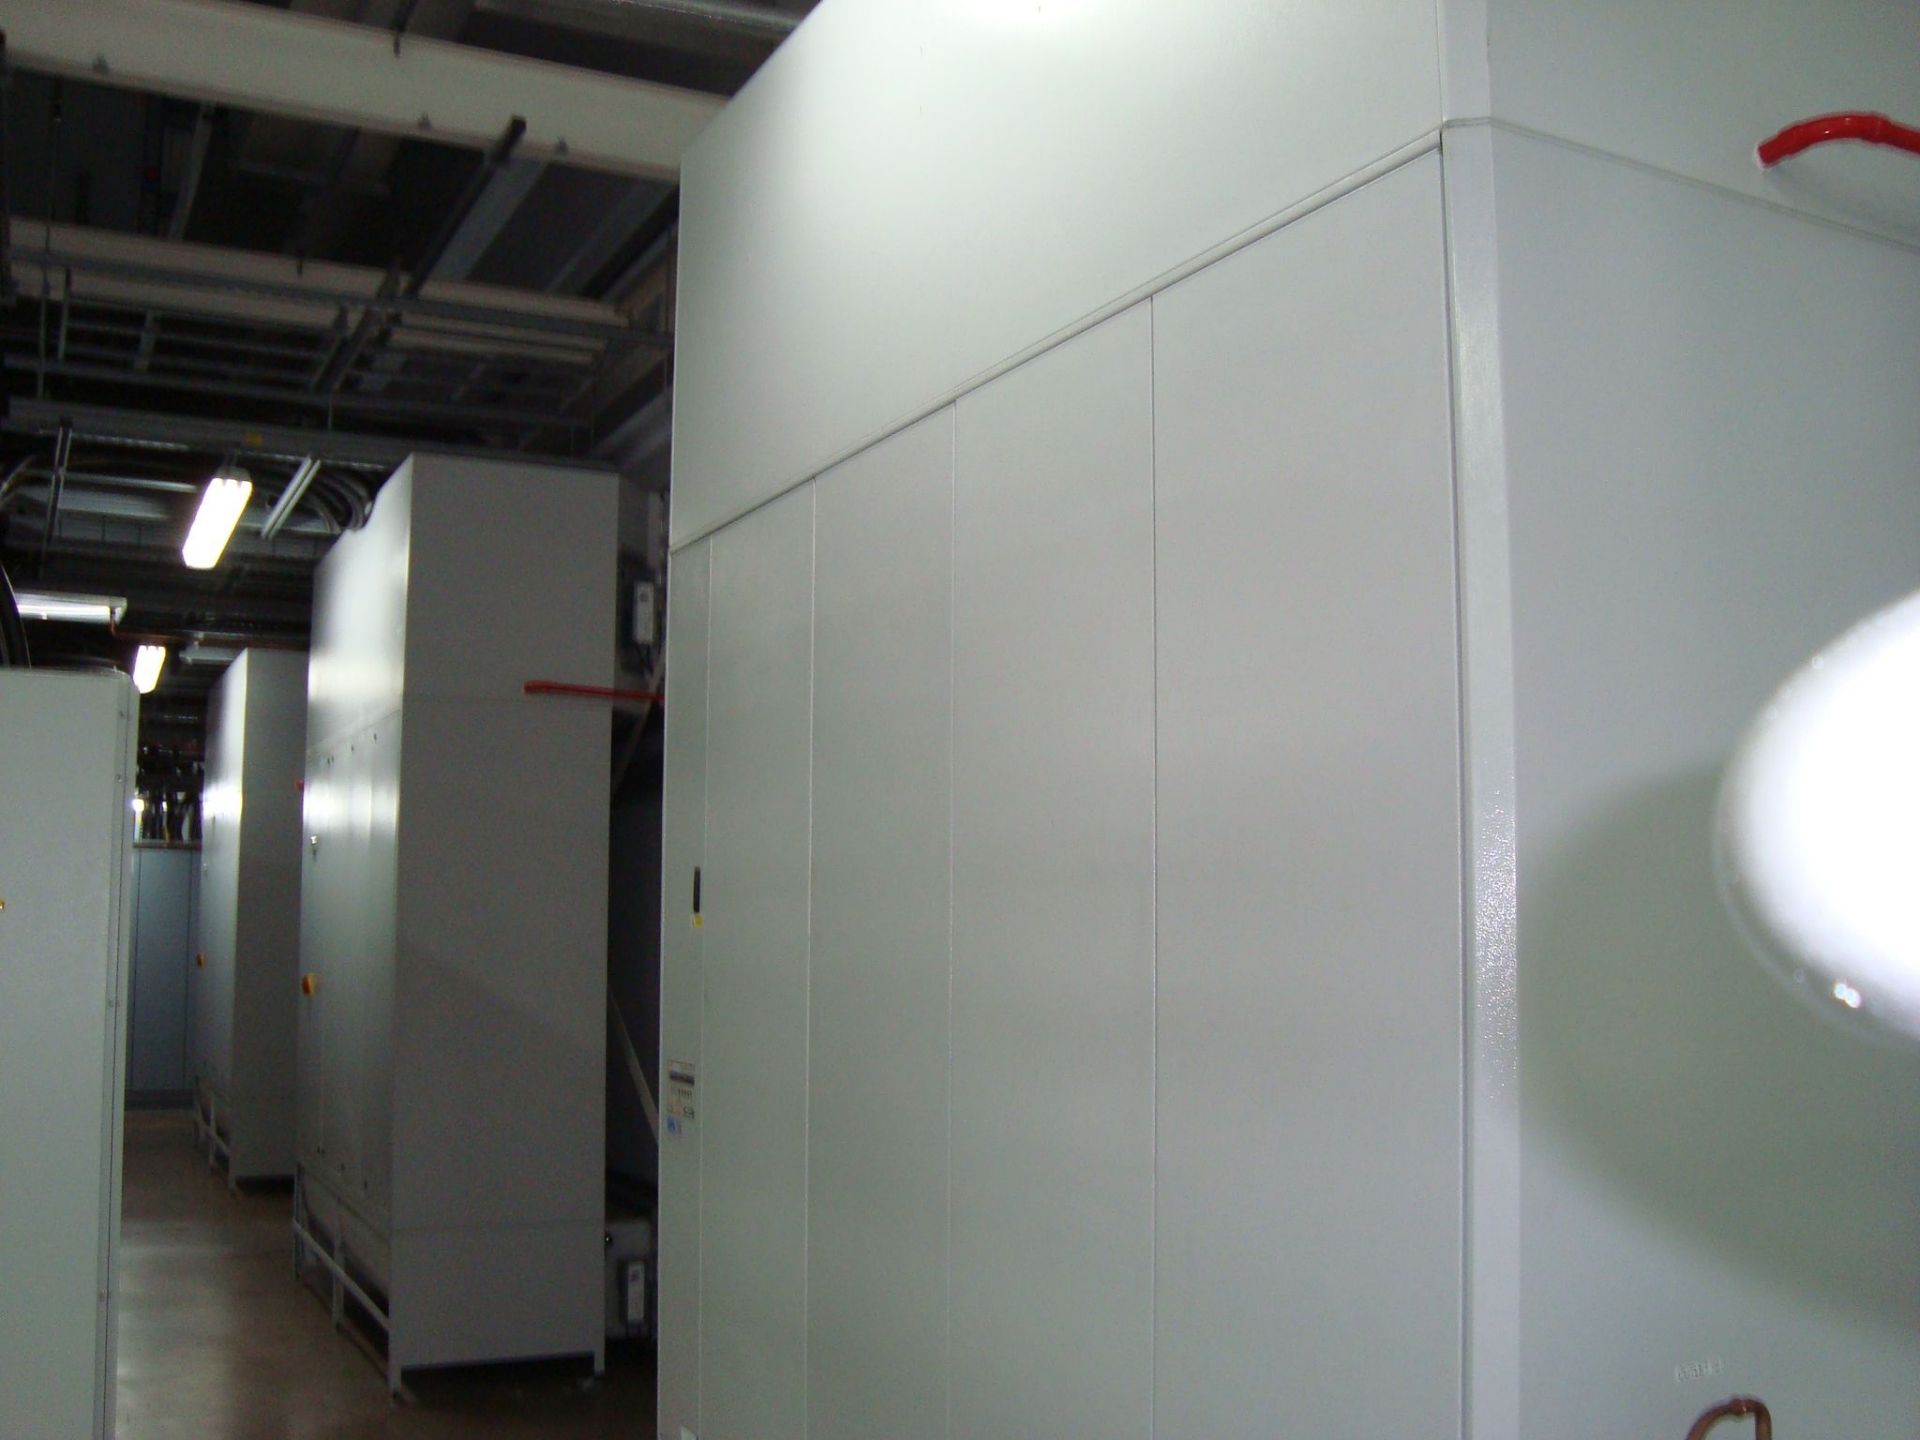 The computer room air conditioning [CRAC] air handling system throughout including - Image 23 of 30